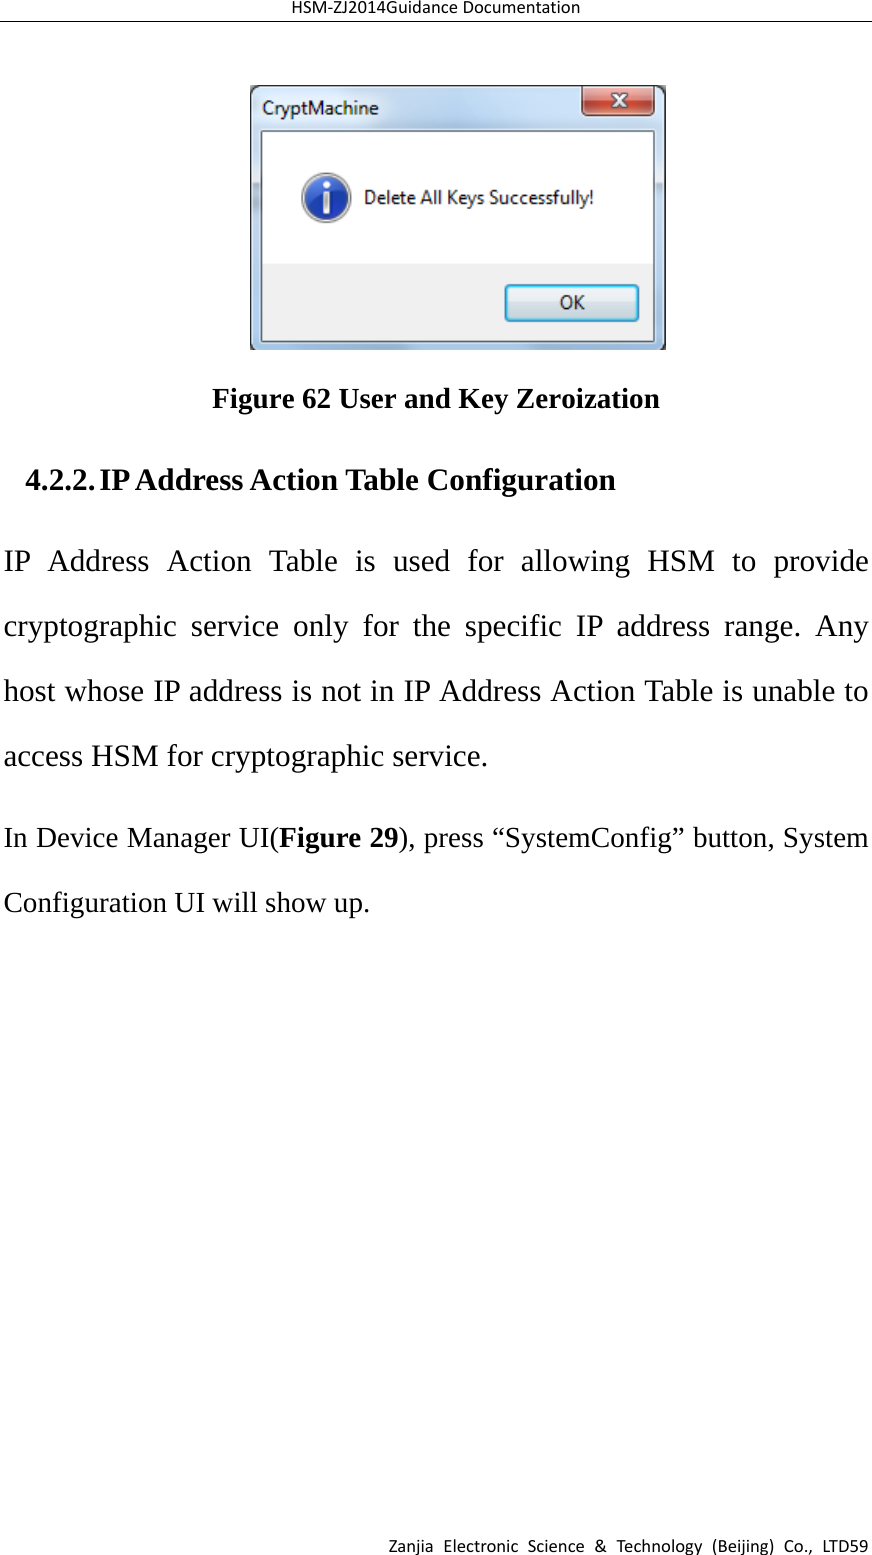 HSM‐ZJ2014GuidanceDocumentationZanjiaElectronicScience&amp;Technology(Beijing)Co.,LTD59 Figure 62 User and Key Zeroization 4.2.2. IP Address Action Table Configuration IP Address Action Table is used for allowing HSM to provide cryptographic service only for the specific IP address range. Any host whose IP address is not in IP Address Action Table is unable to access HSM for cryptographic service. In Device Manager UI(Figure 29), press “SystemConfig” button, System Configuration UI will show up.   